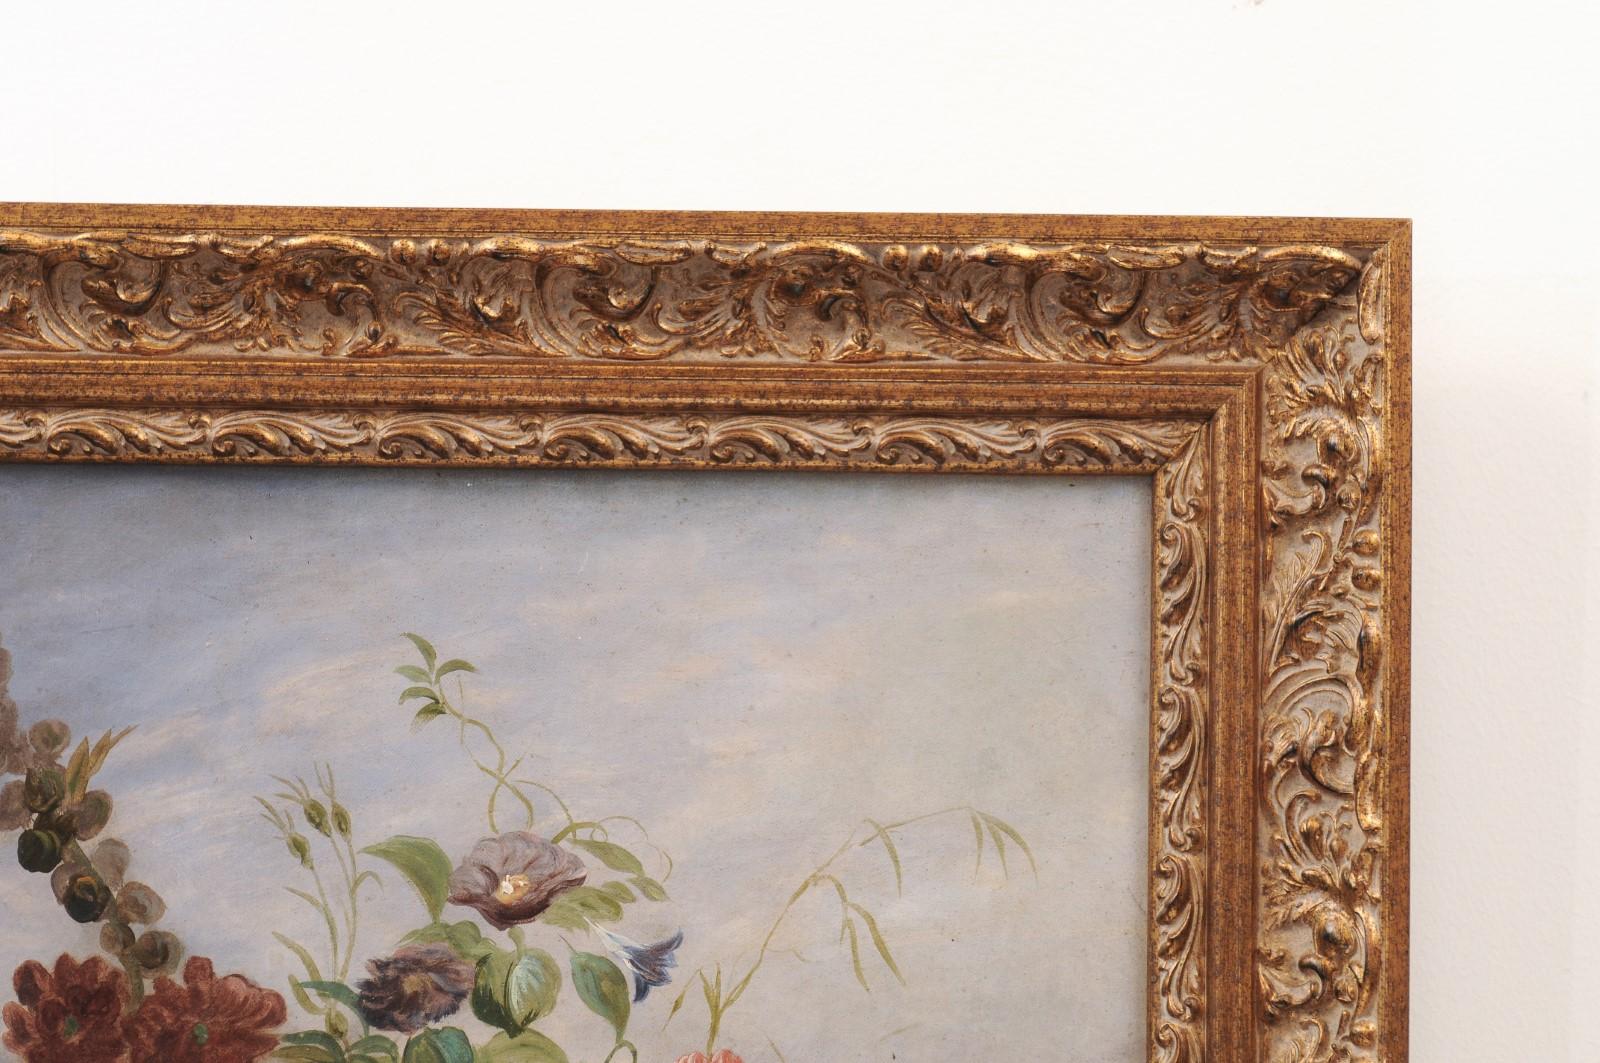 French 19th Century Oil on Canvas Floral Painting circa 1830 in Gilt Frame For Sale 4